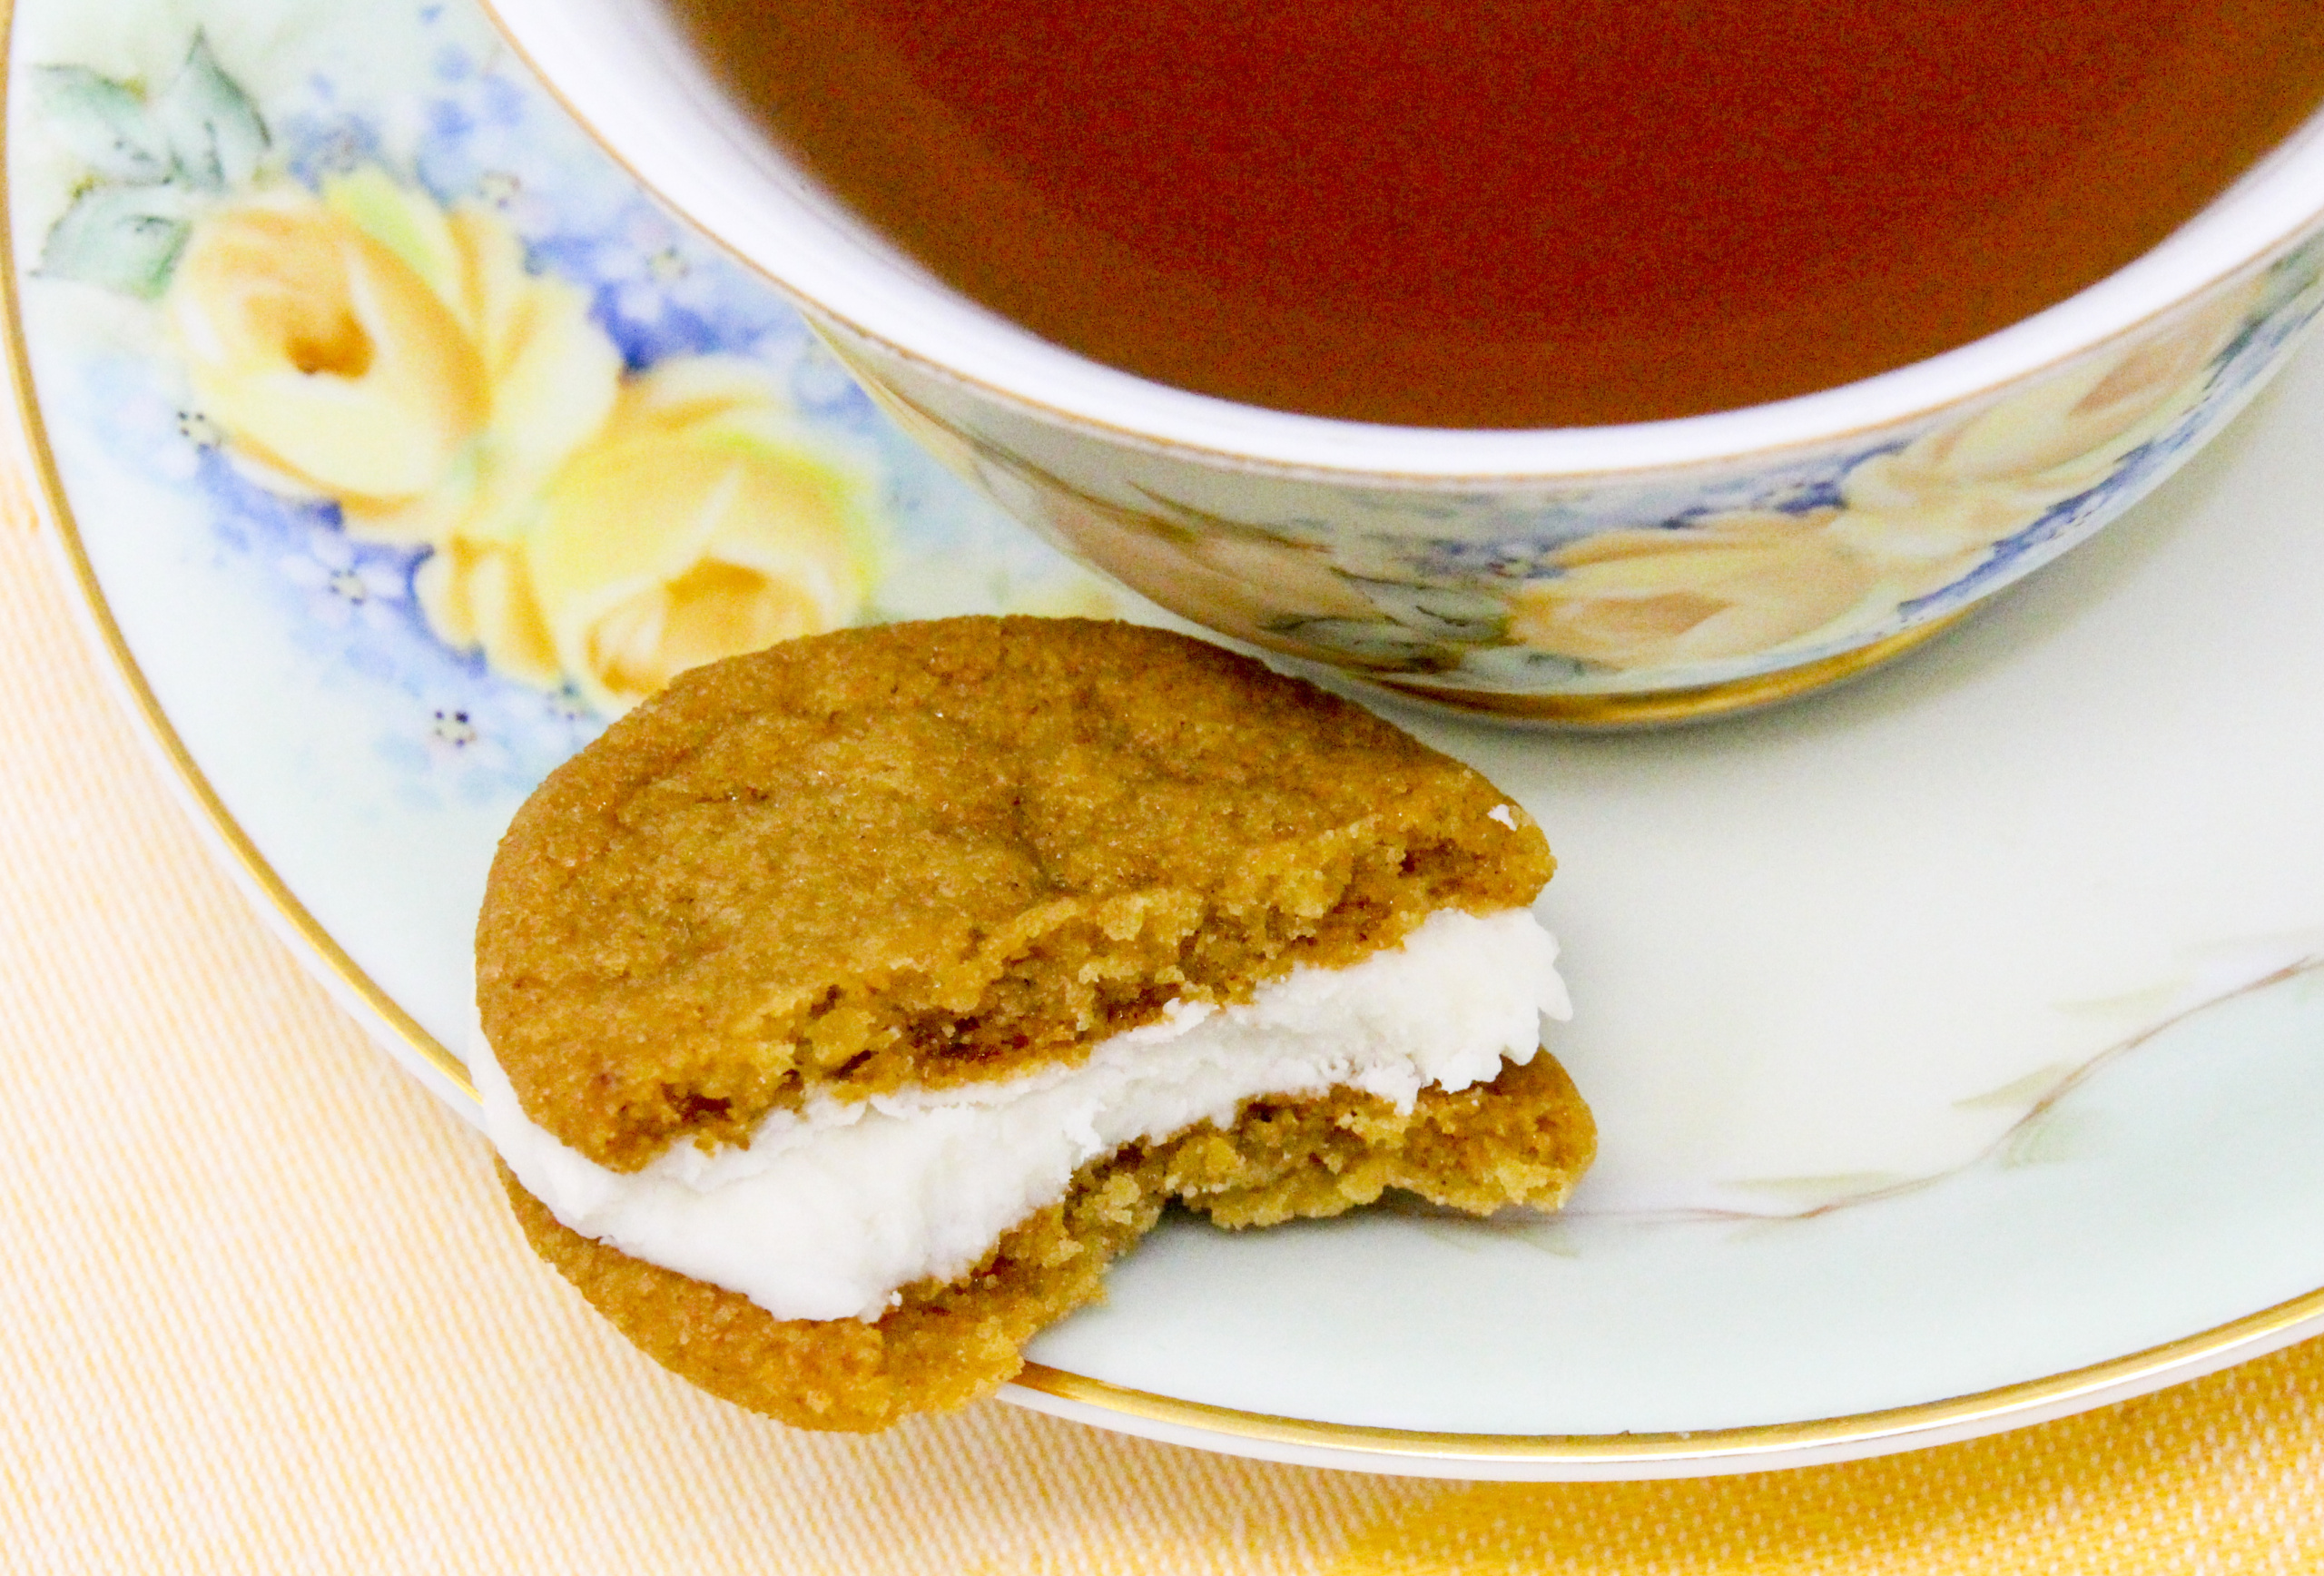 Chockful of flavor, these Lemon-Ginger Sandwich Cookies are a bit crunchy on the edges and soft and sweet on the insides. Perfection in each bite! Recipe shared with permission granted by Darci Hannah, author of MURDER AT THE CHRISTMAS COOKIE BAKE-OFF.